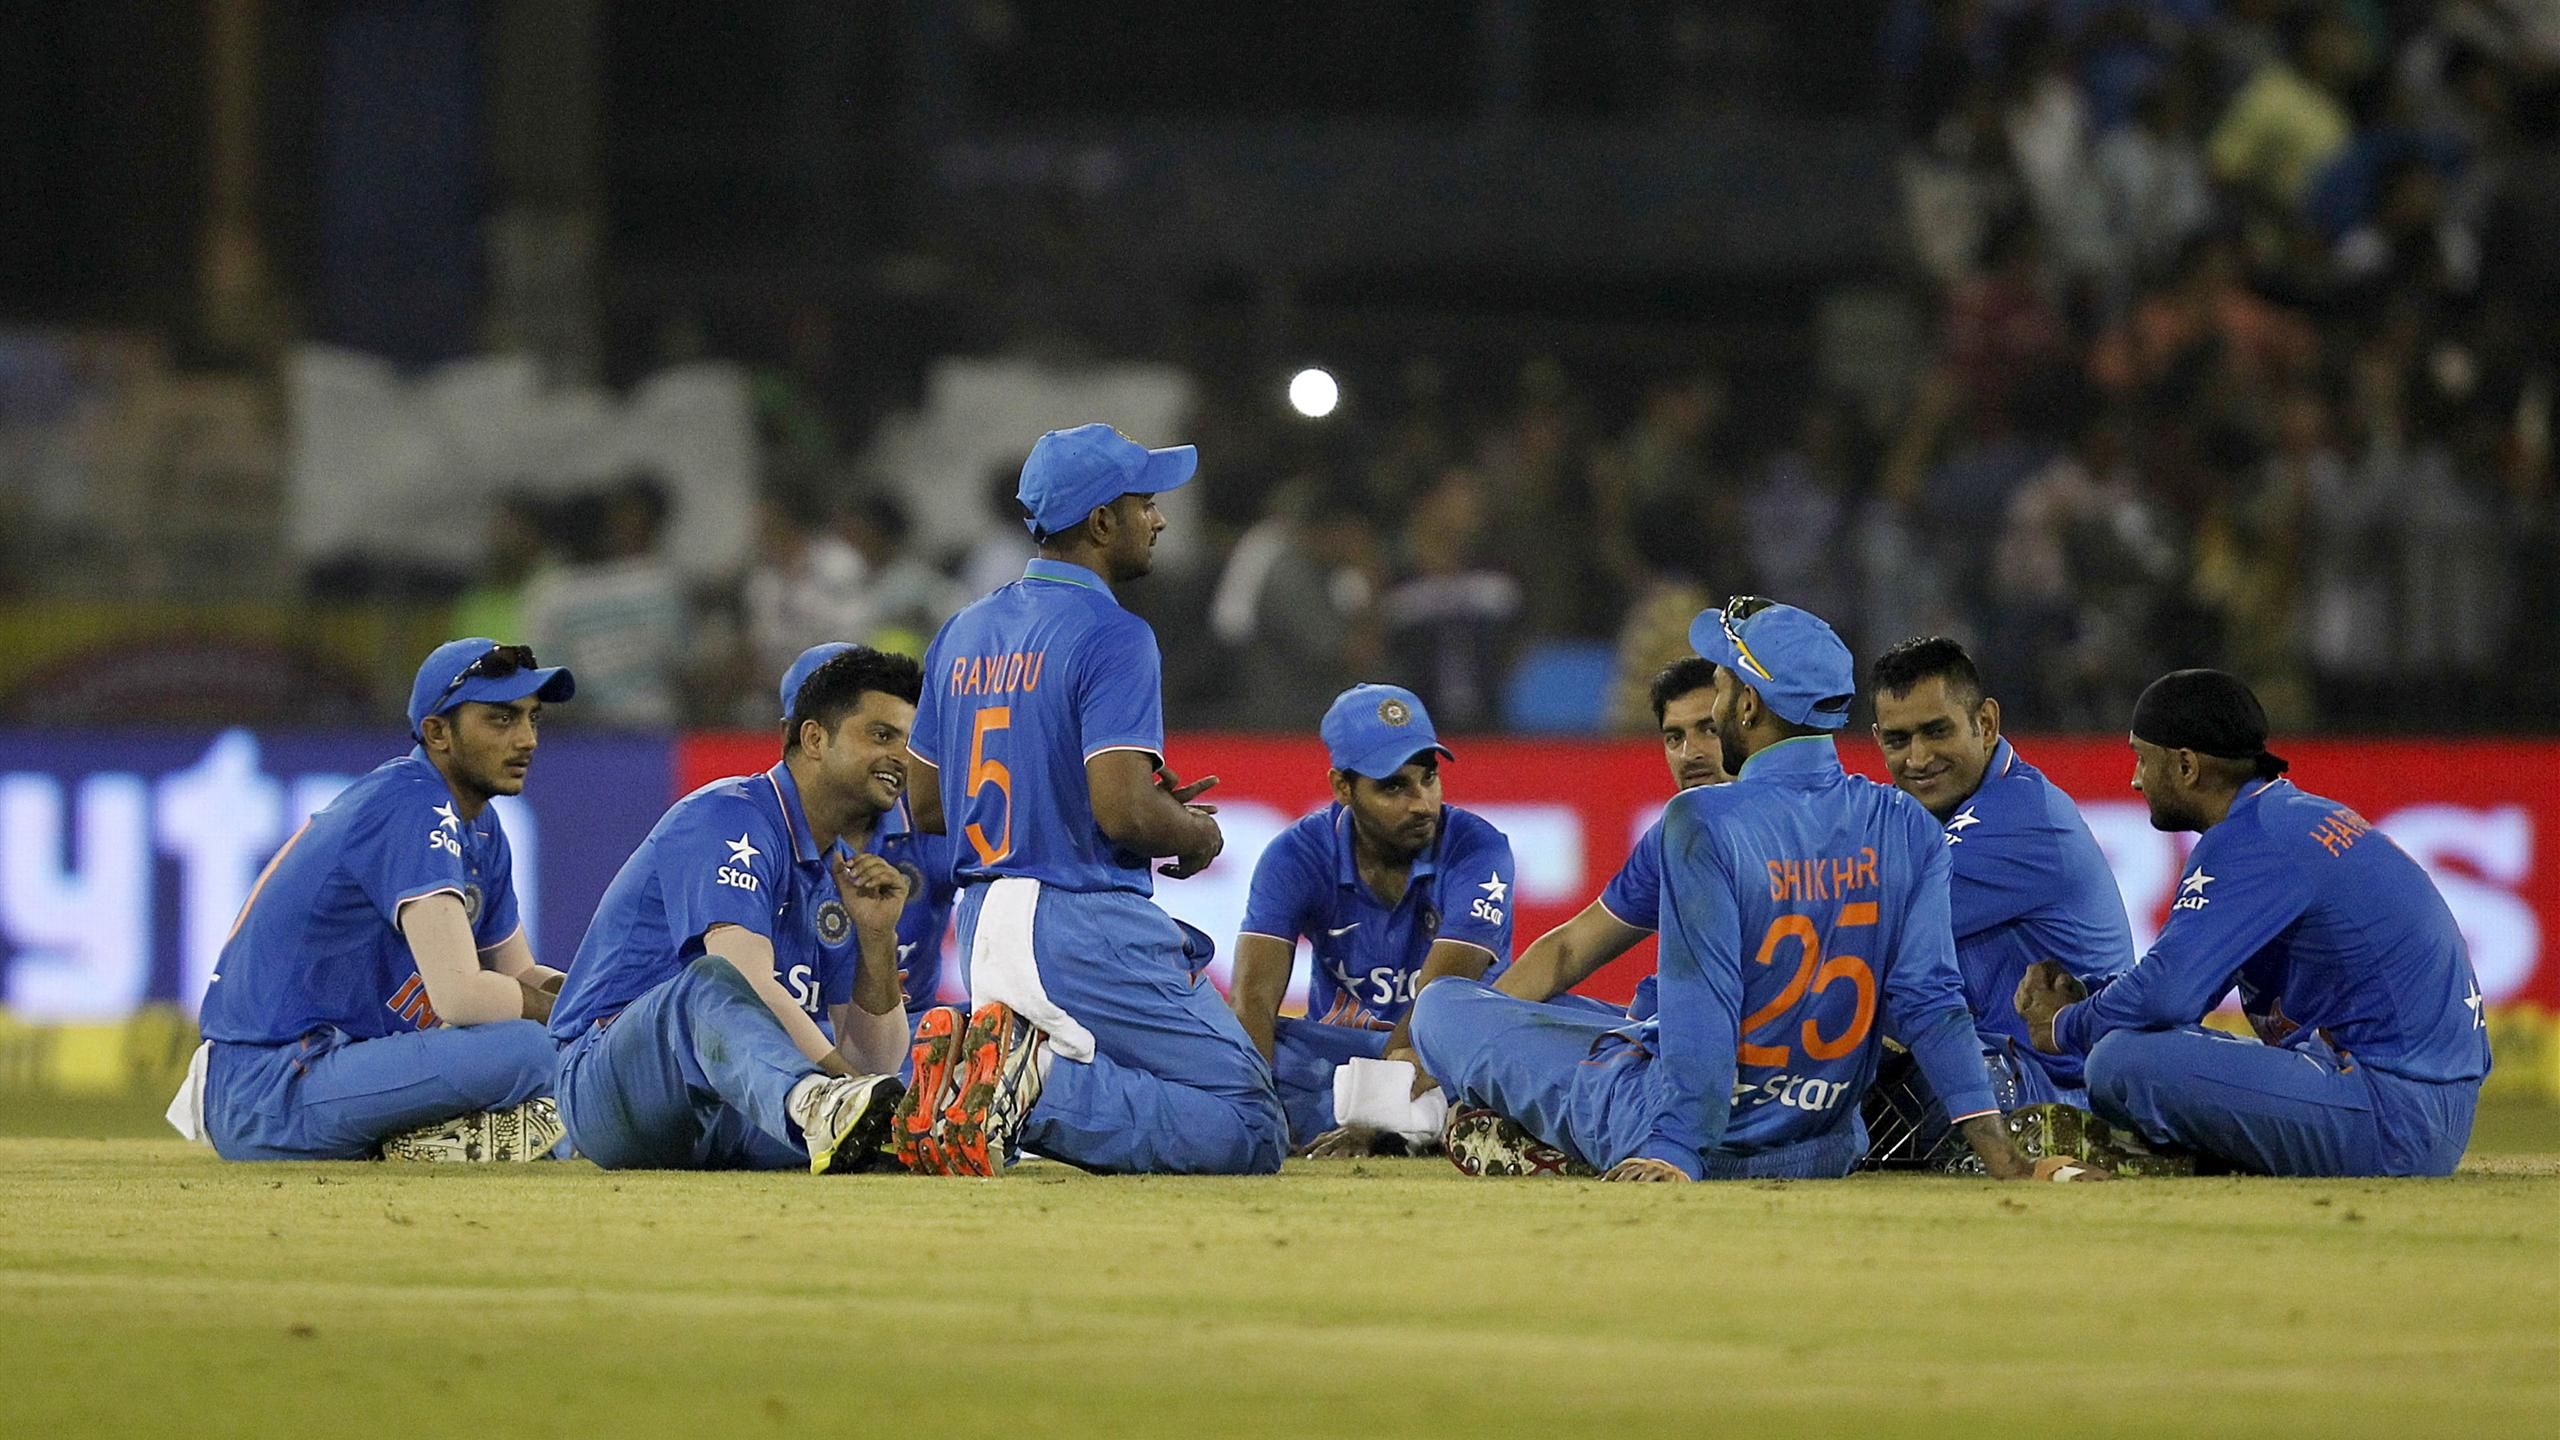 India v South Africa T20 suspended due to crowd trouble